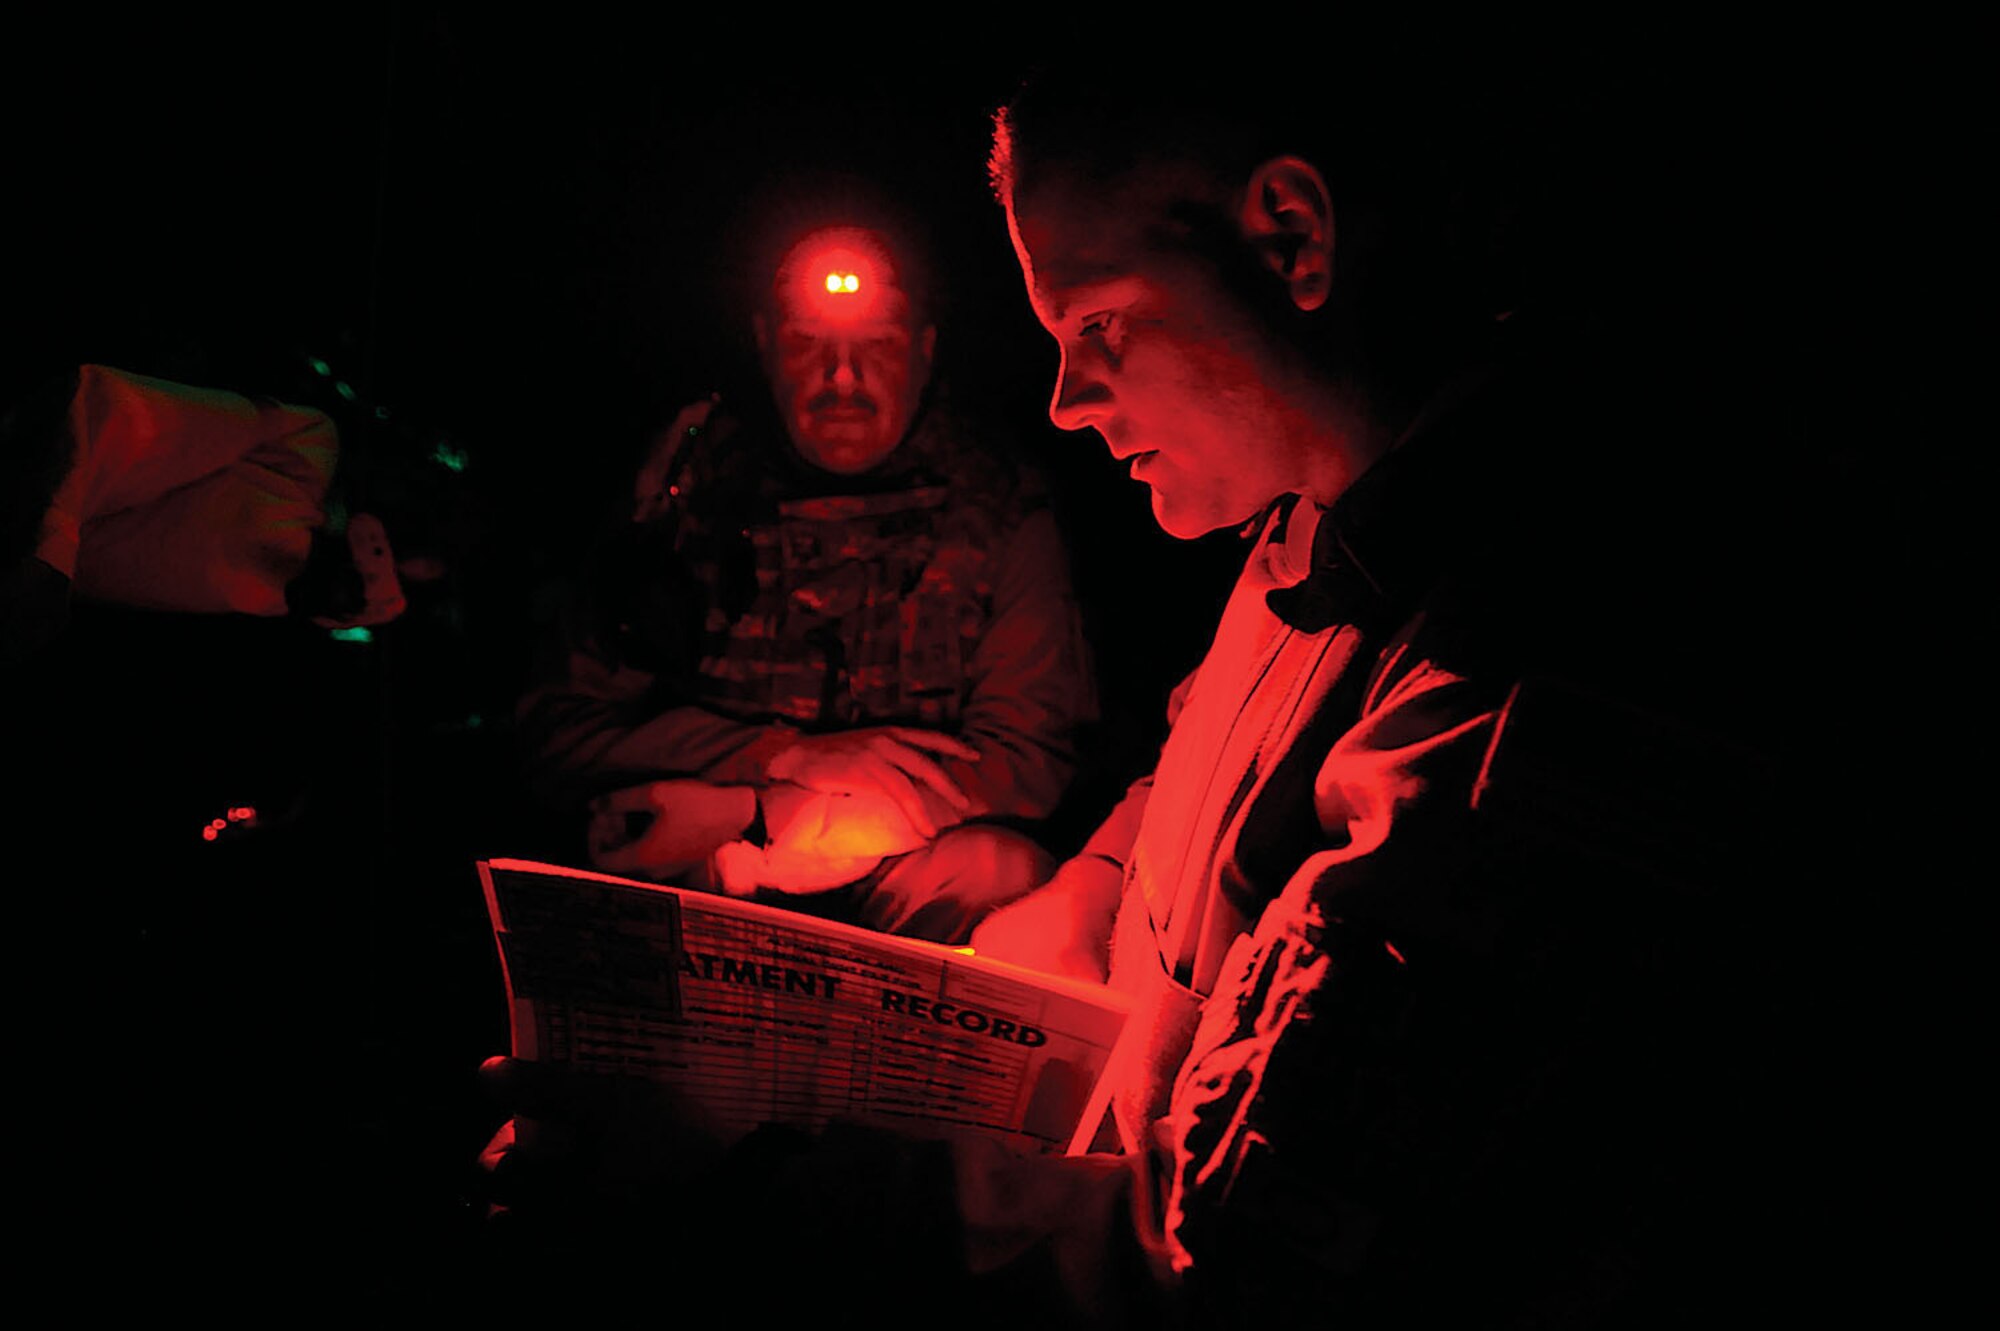 Capt. James Ryan, 446th Aeromedical Evaucation Squadron, checks patient records with light from Master Sgt. Scott Wilkes' head lamp during an aeromedical evacuation mission over Iraq Nov. 7. Captain Ryan, a flight nurse, was one of eight McChord Reservists deployed from October to December 2008 with the 332nd Expeditionary Aeromedical Evaucation Flight. Sergeant Wilkes, a charge medical technician with the 332nd EAEF, was deployed from McGuire AFB, N.J. (U.S. Air Force photo/Airman 1st Class Jason Epley)